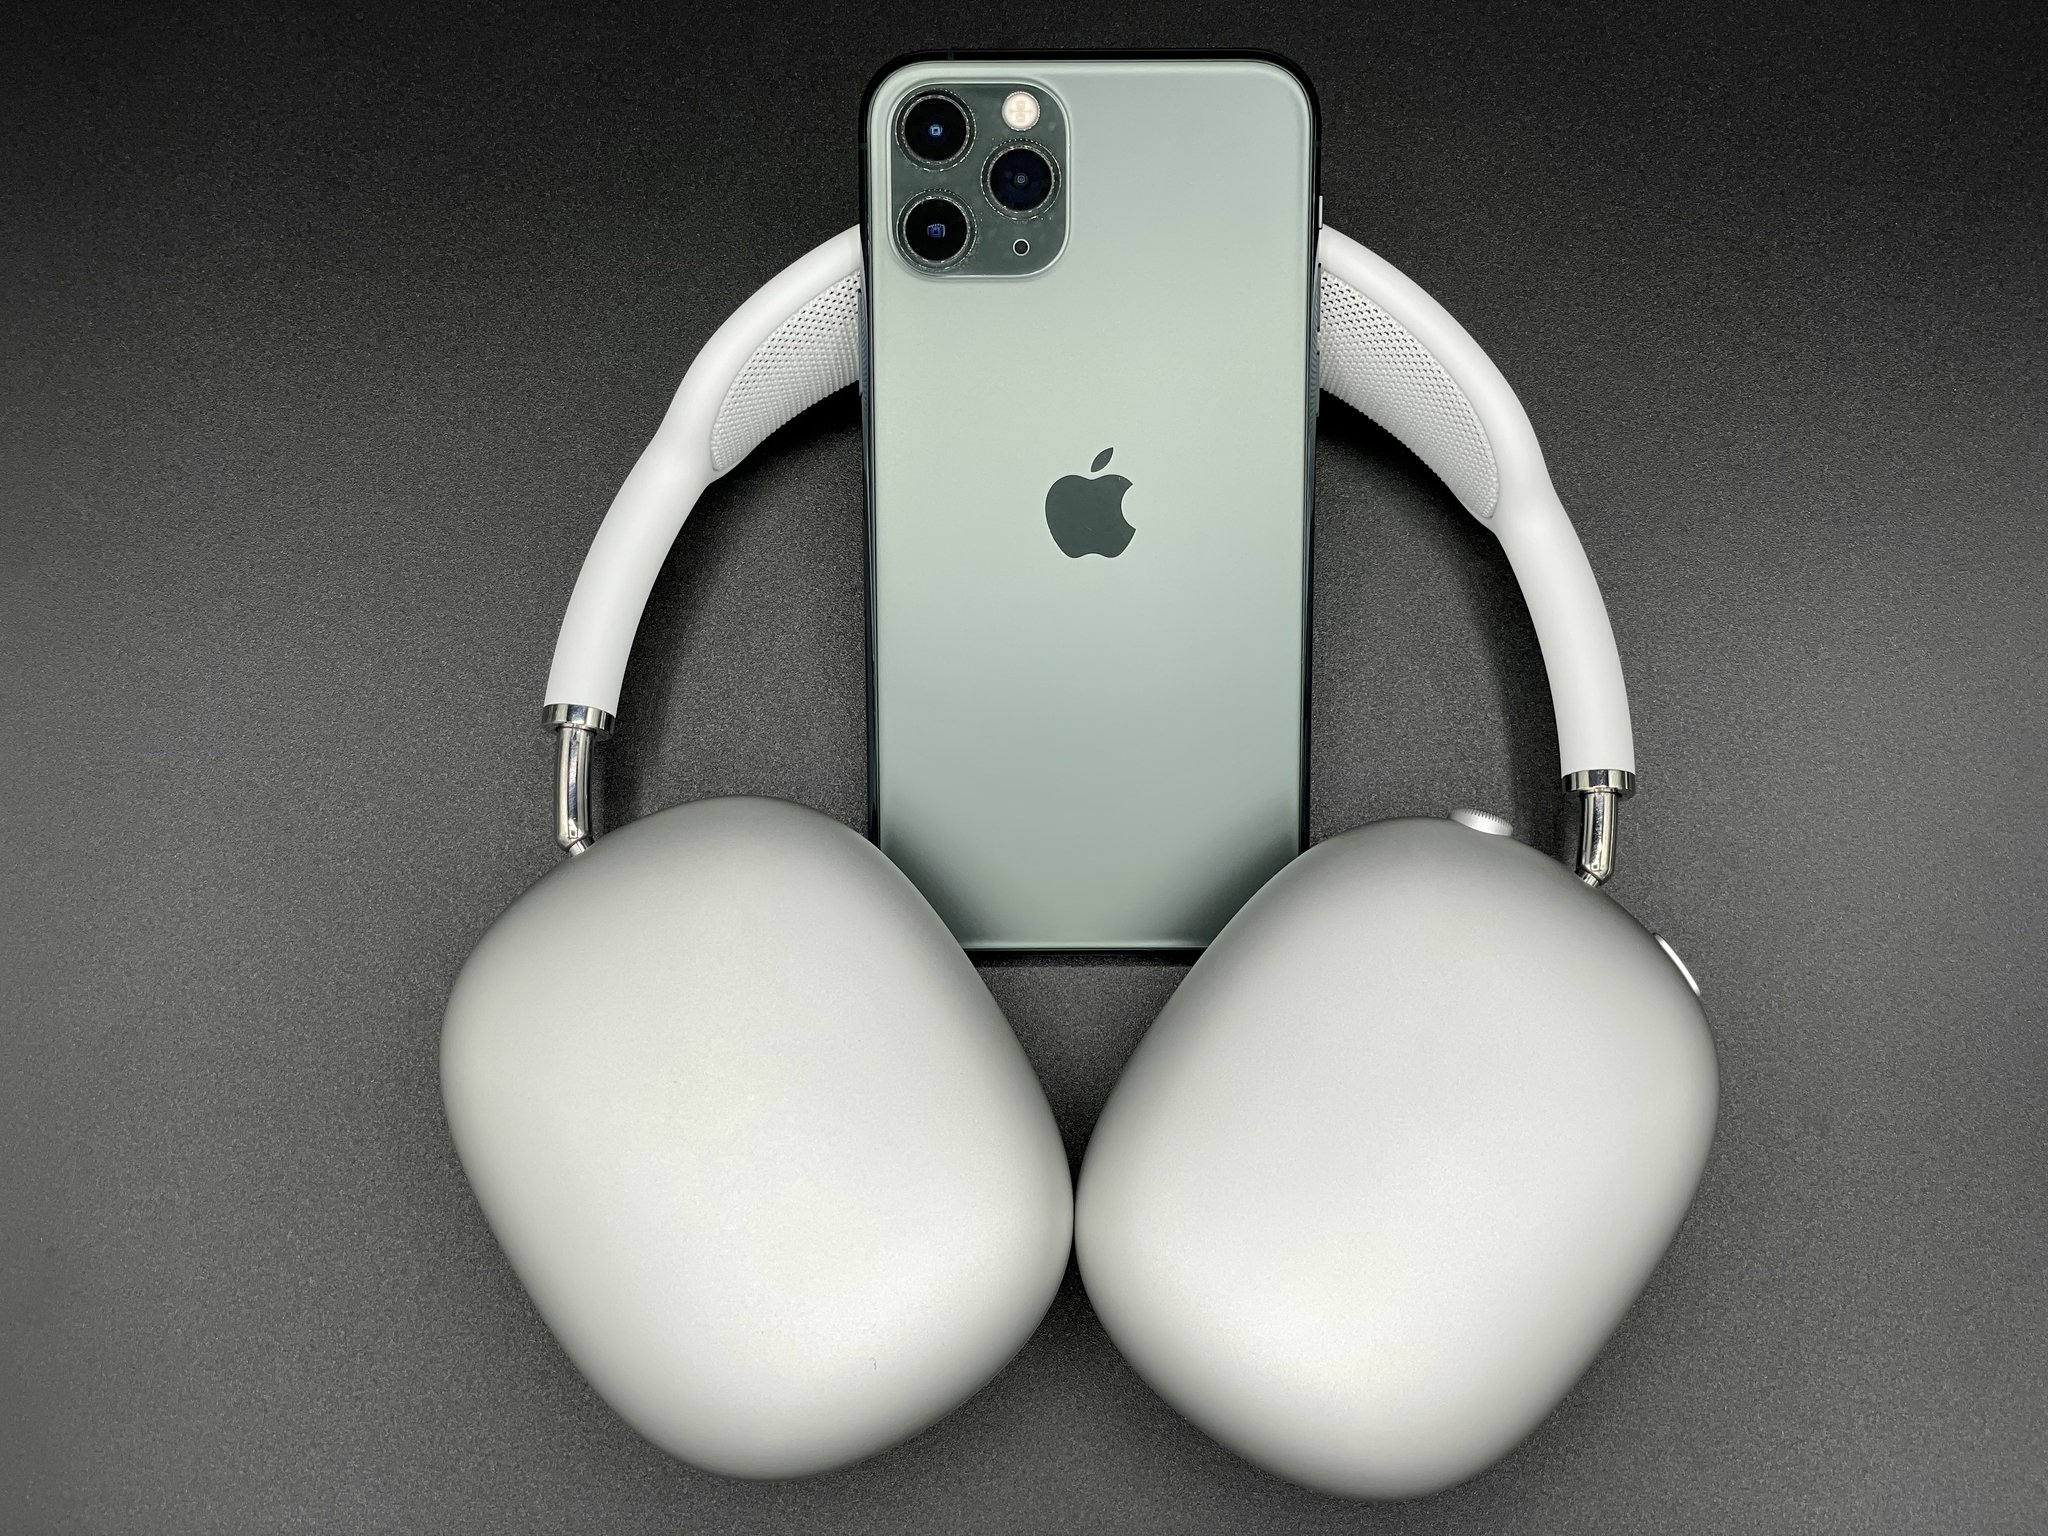 This $399 AirPods Max deal sounds even better than the headphones 